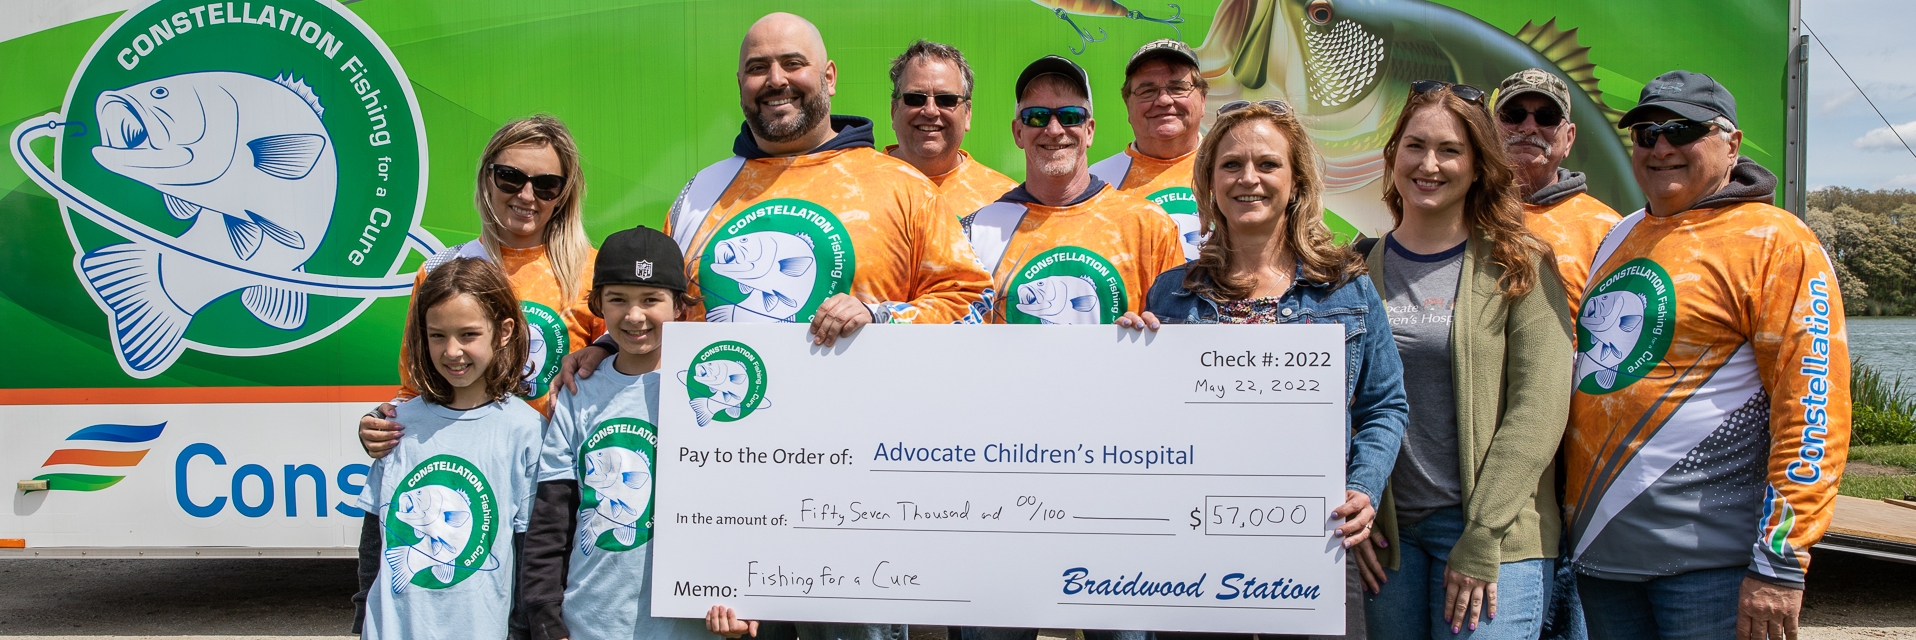 Constellation's 'Fishing for a Cure' Raises more than 57,000 for